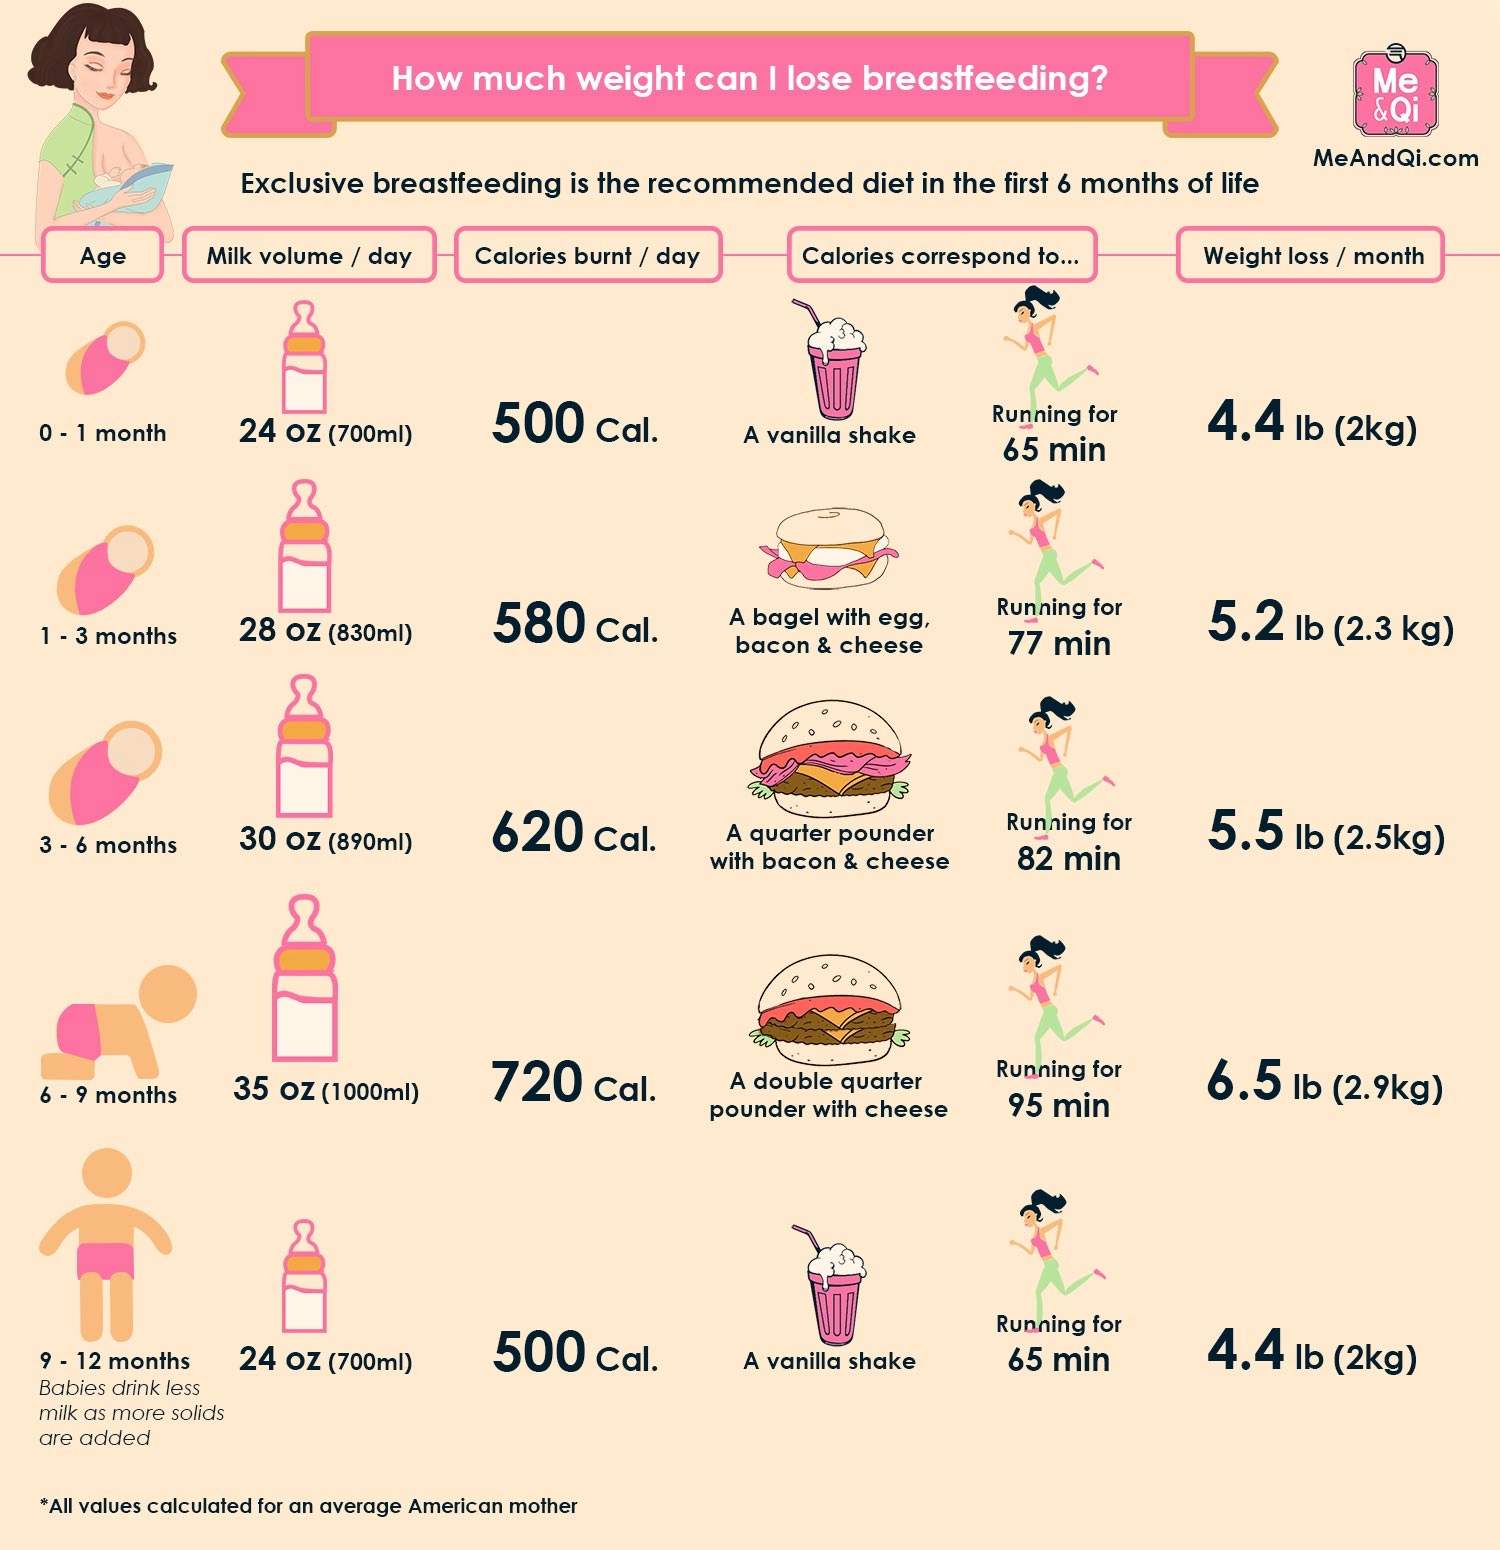 How much weight can you lose breastfeeding?